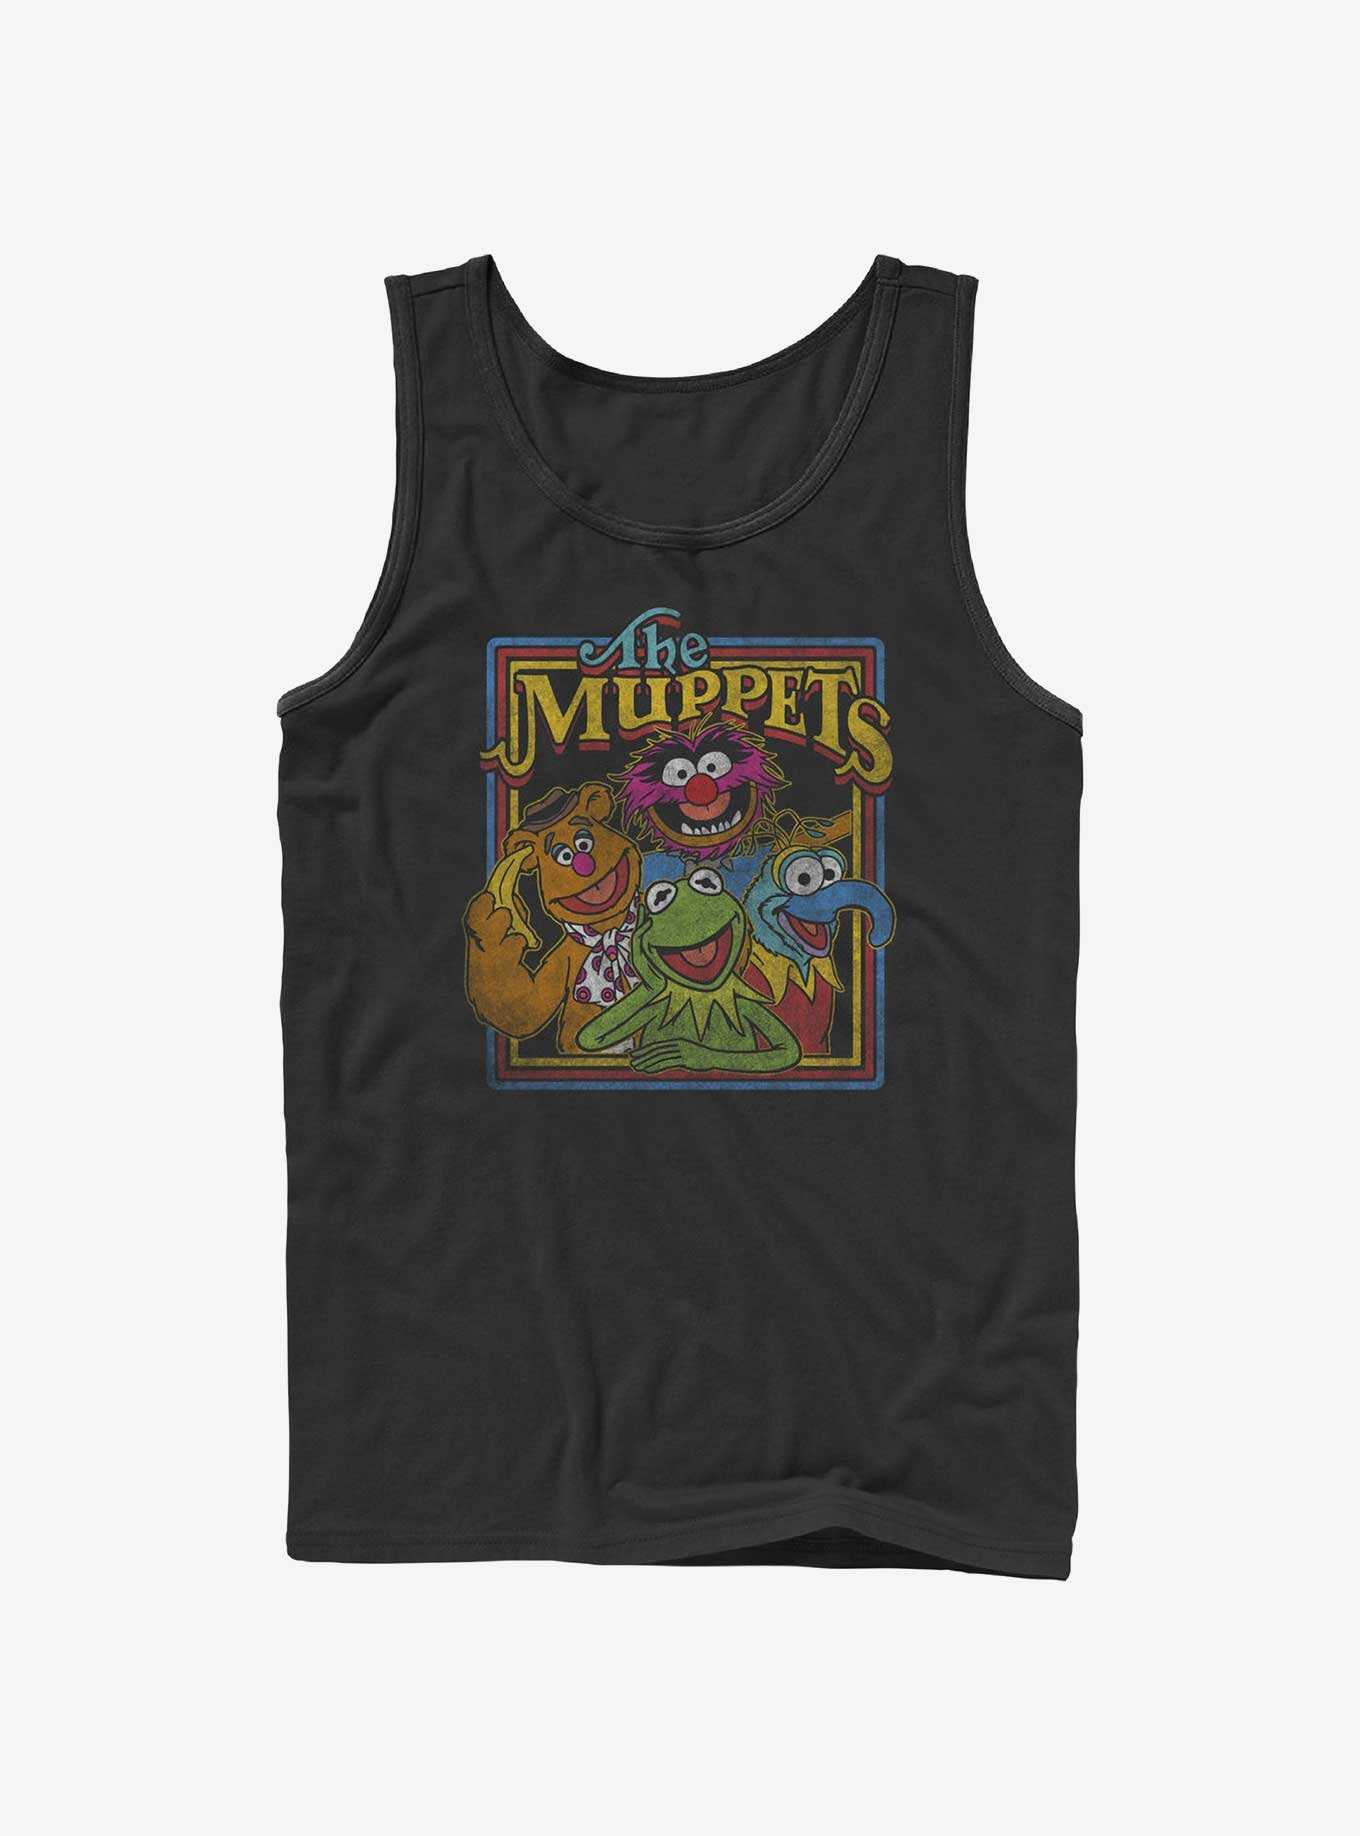 Two Amazing New Men's Tank Tops Land at Disney Springs